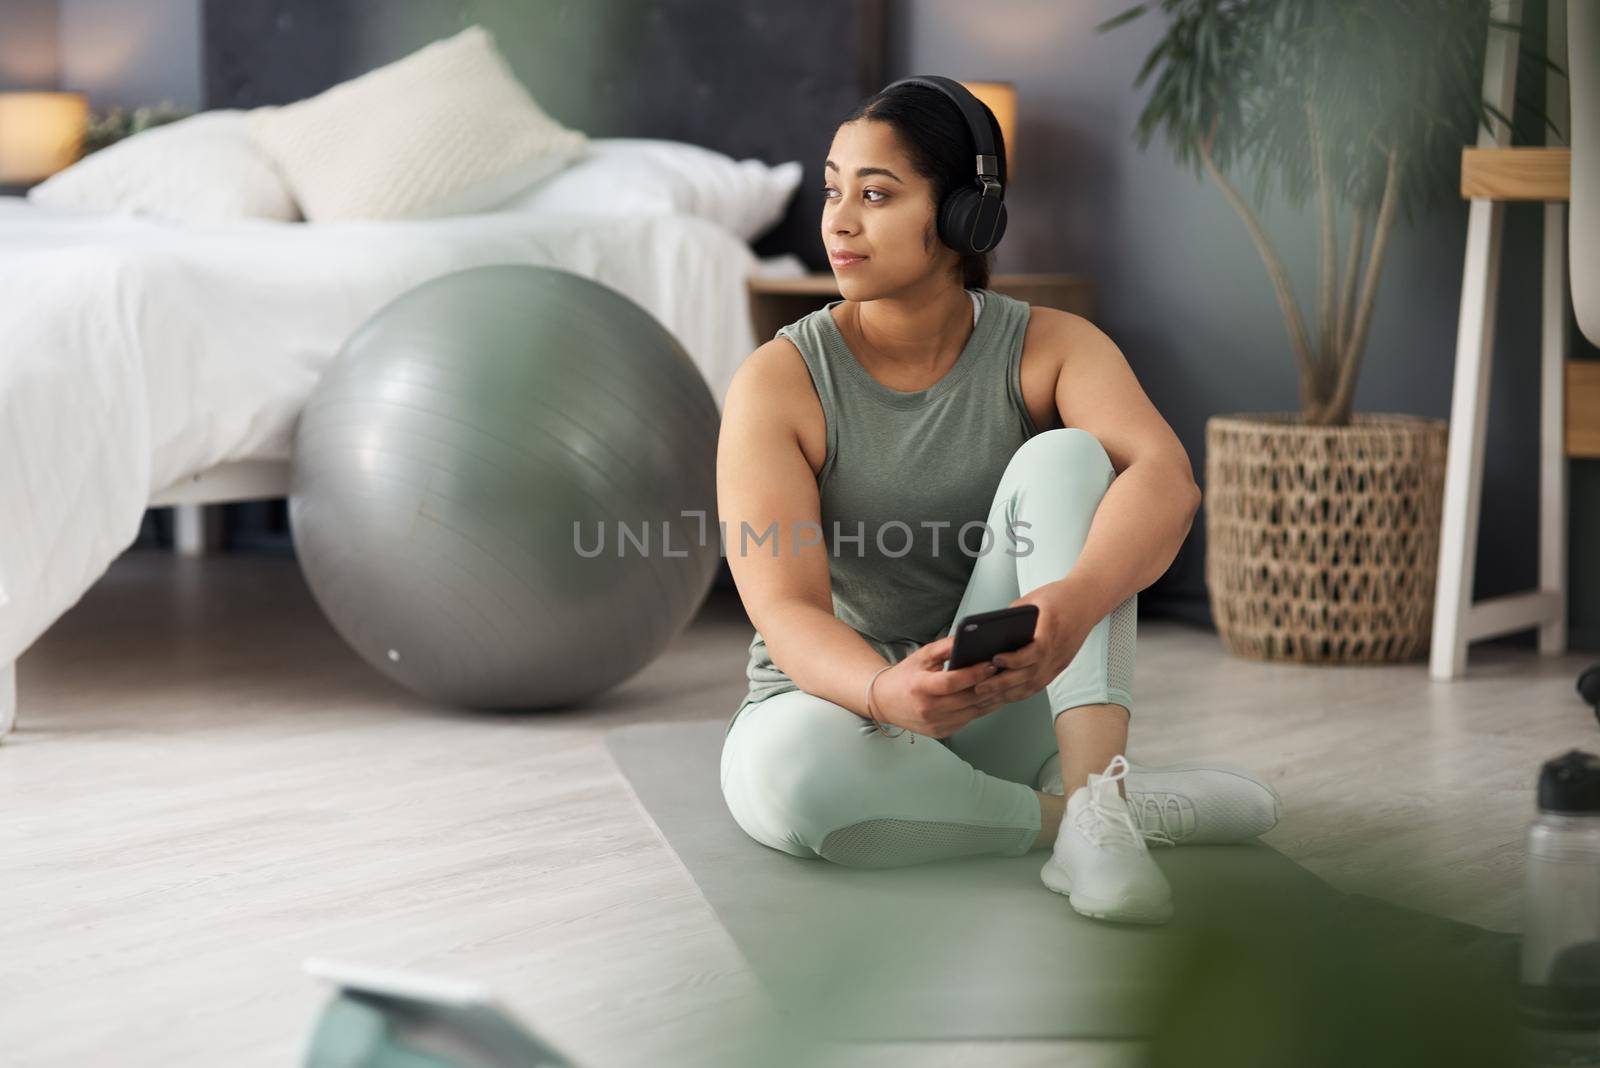 Taking breaks with her connections. a sporty young woman wearing headphones and using a cellphone while exercising at home. by YuriArcurs